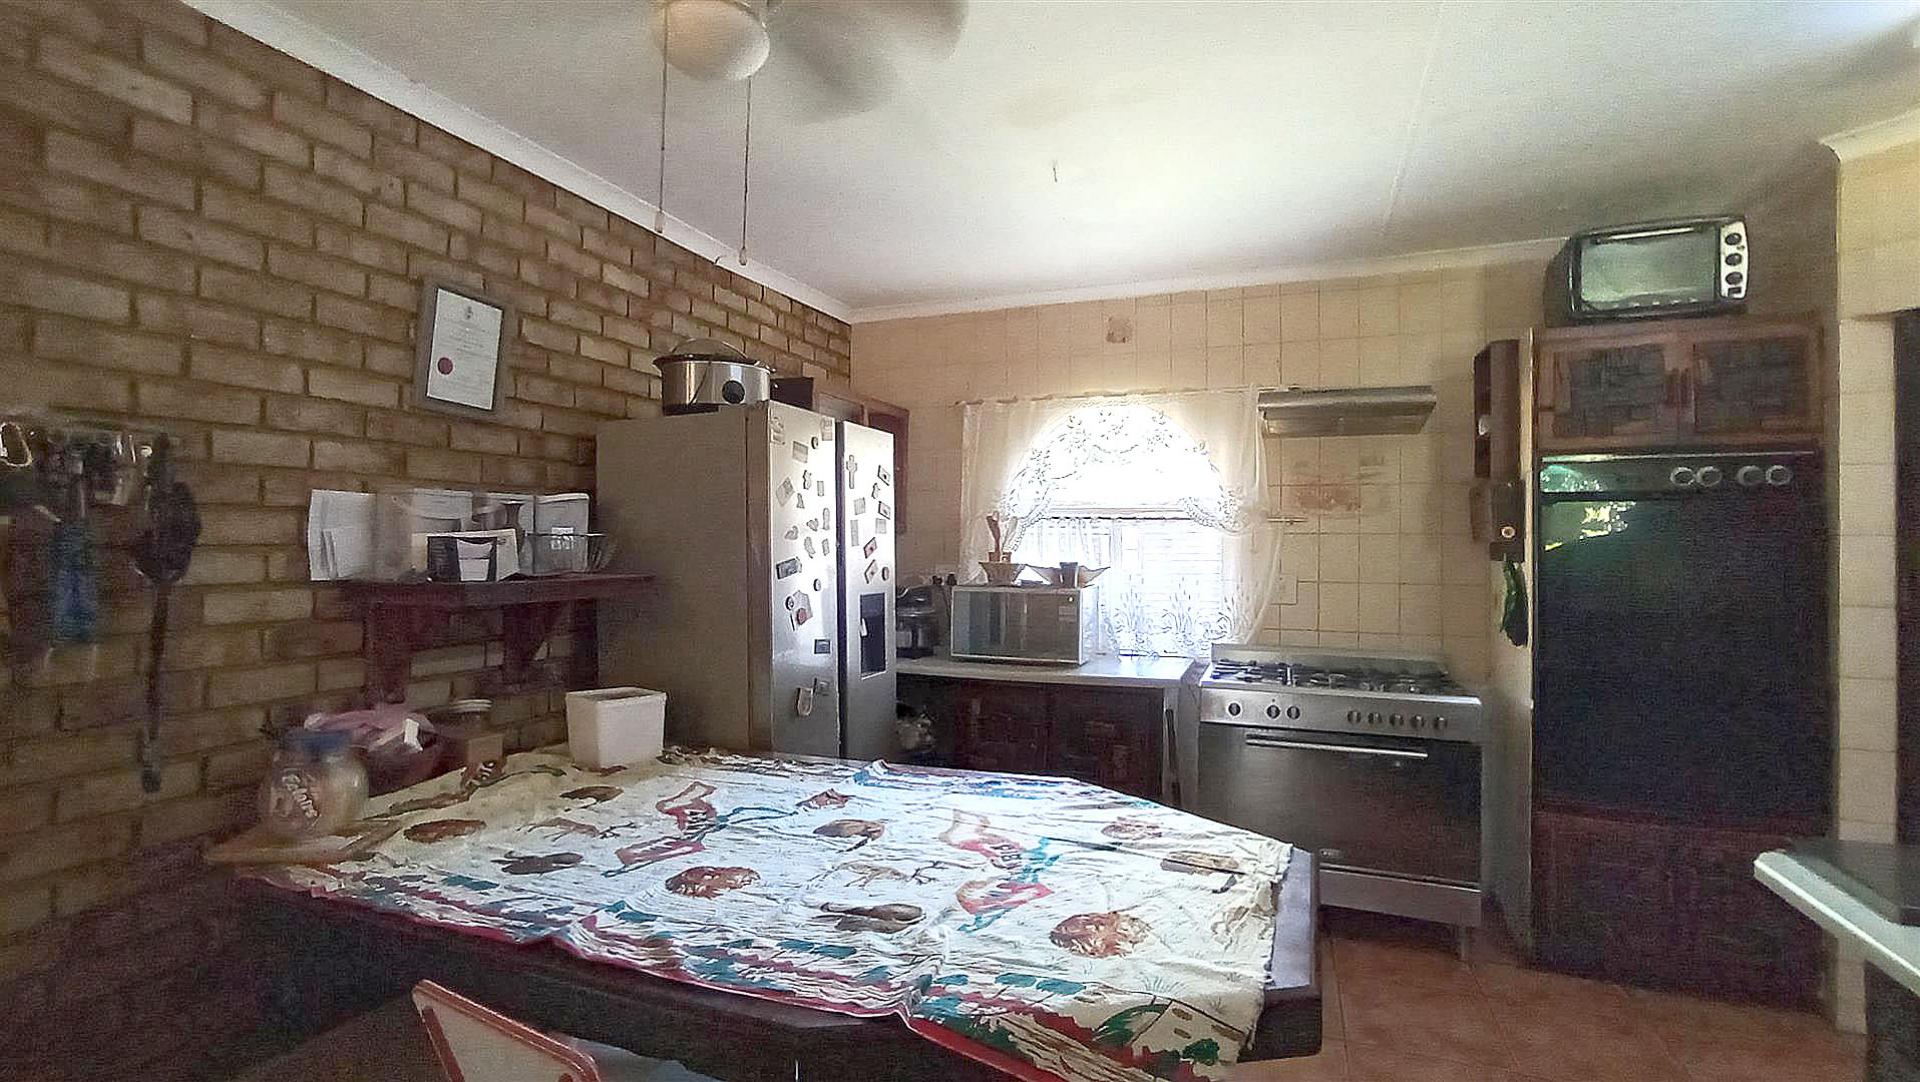 Kitchen - 24 square meters of property in The Orchards